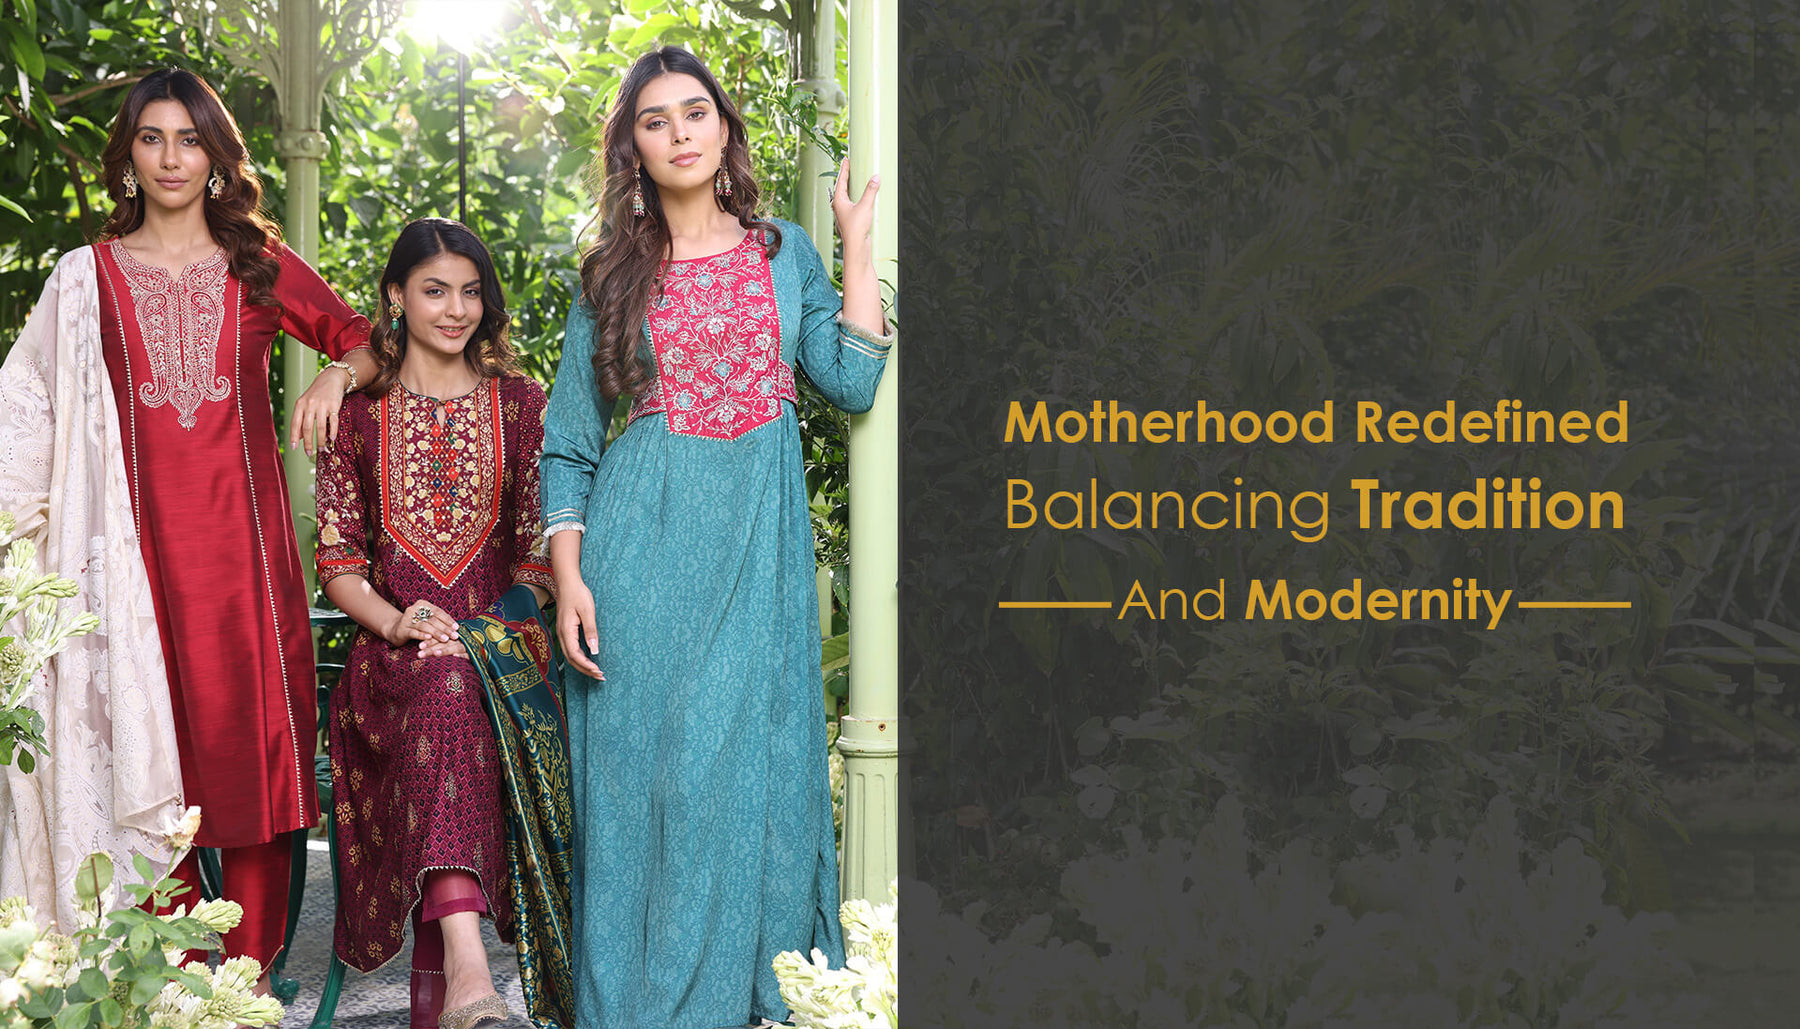 Motherhood Redefined: Balancing Tradition And Modernity